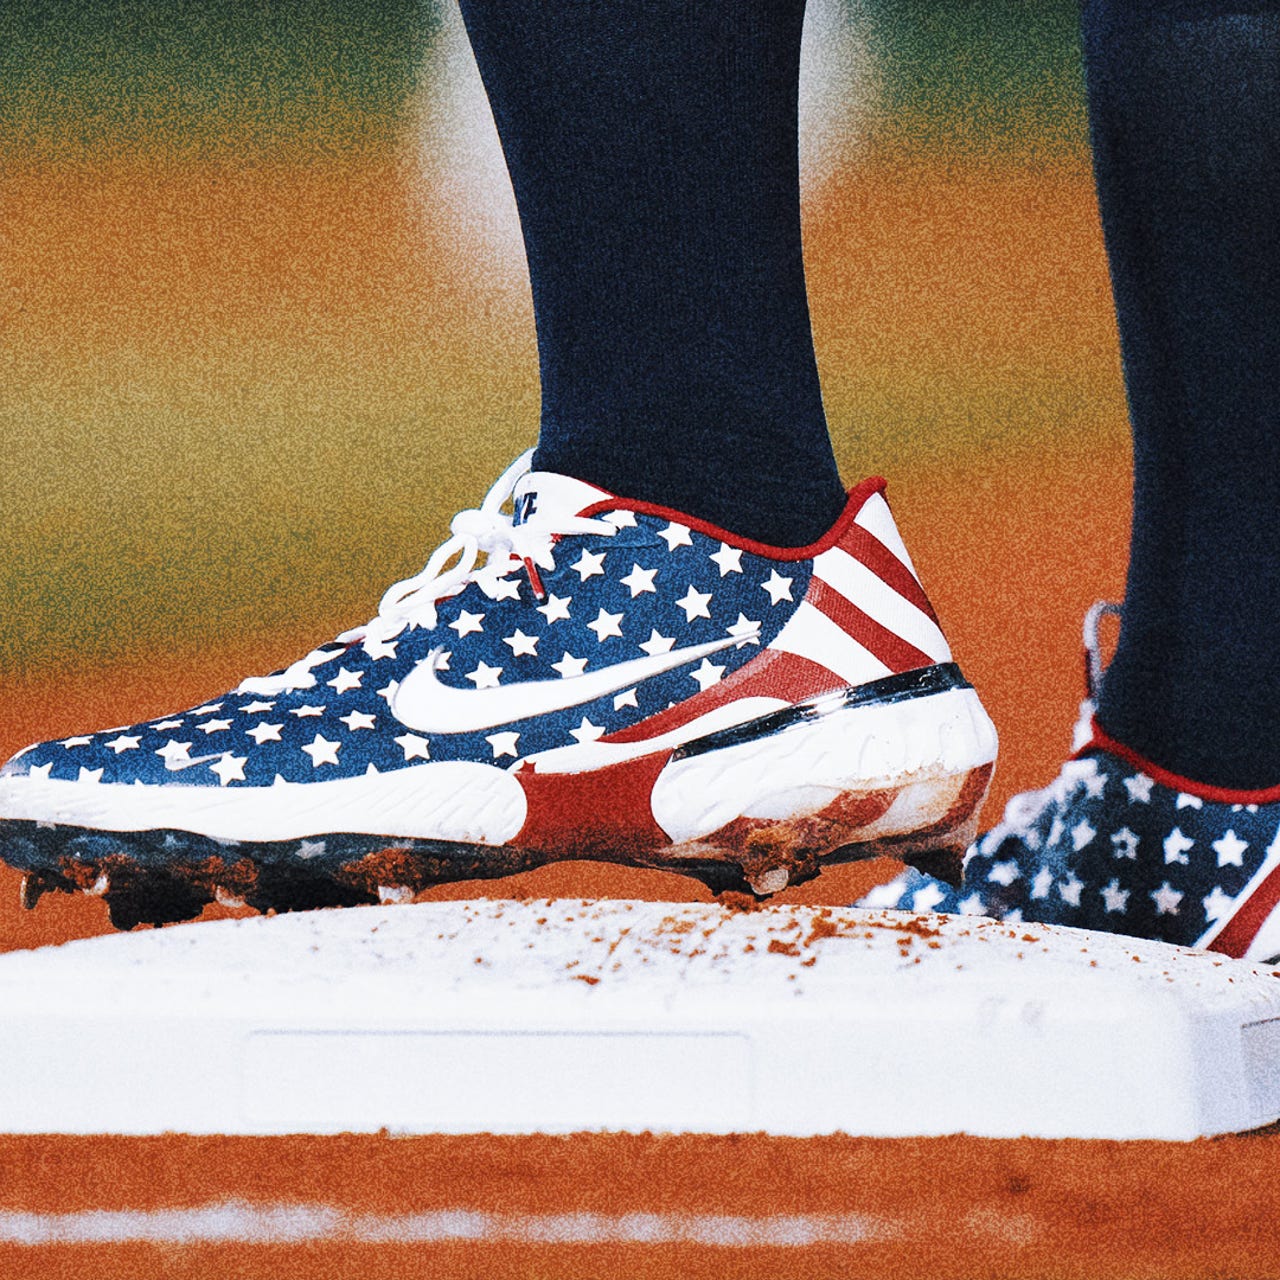 World Baseball Classic players get artsy with custom cleats